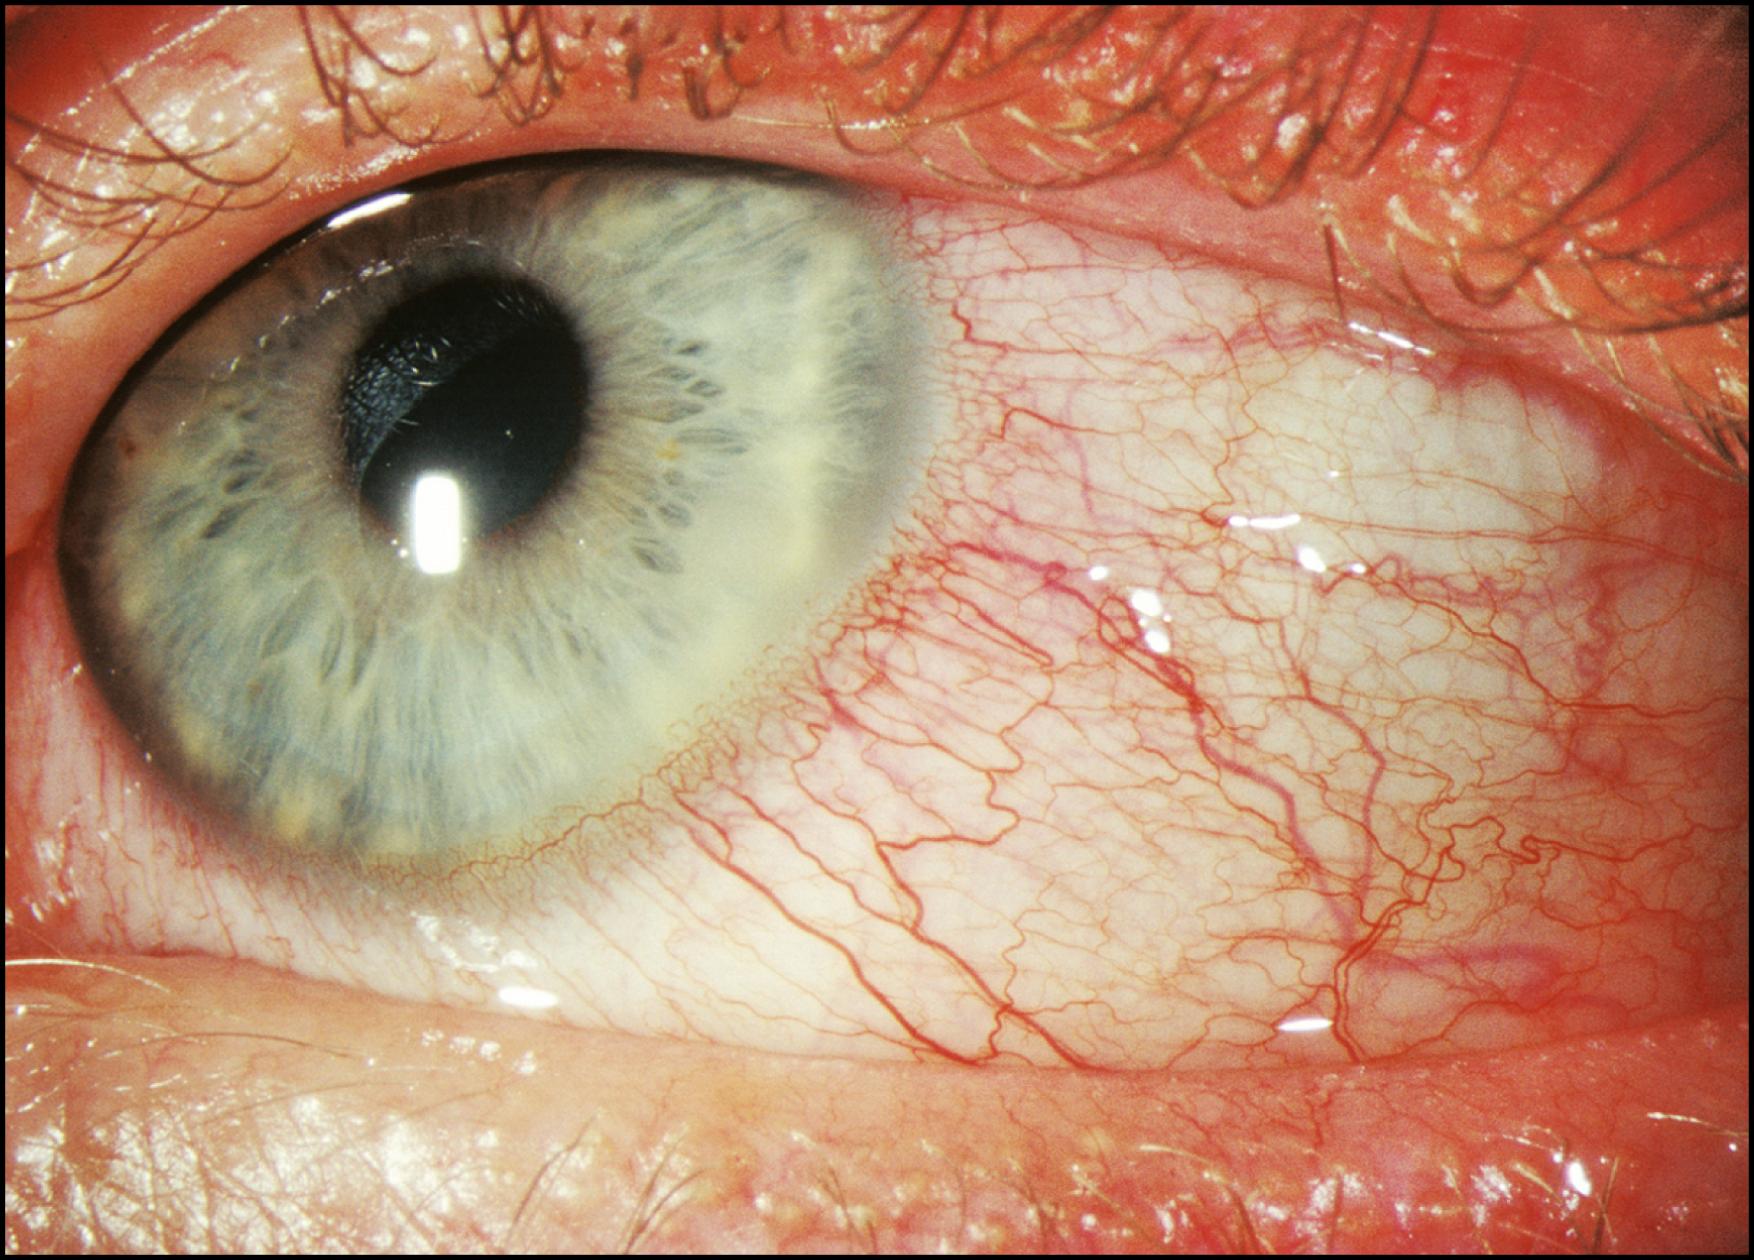 Fig. 7.4, Staphylococcal keratoconjunctivitis and blepharitis are presented in diffuse illumination.